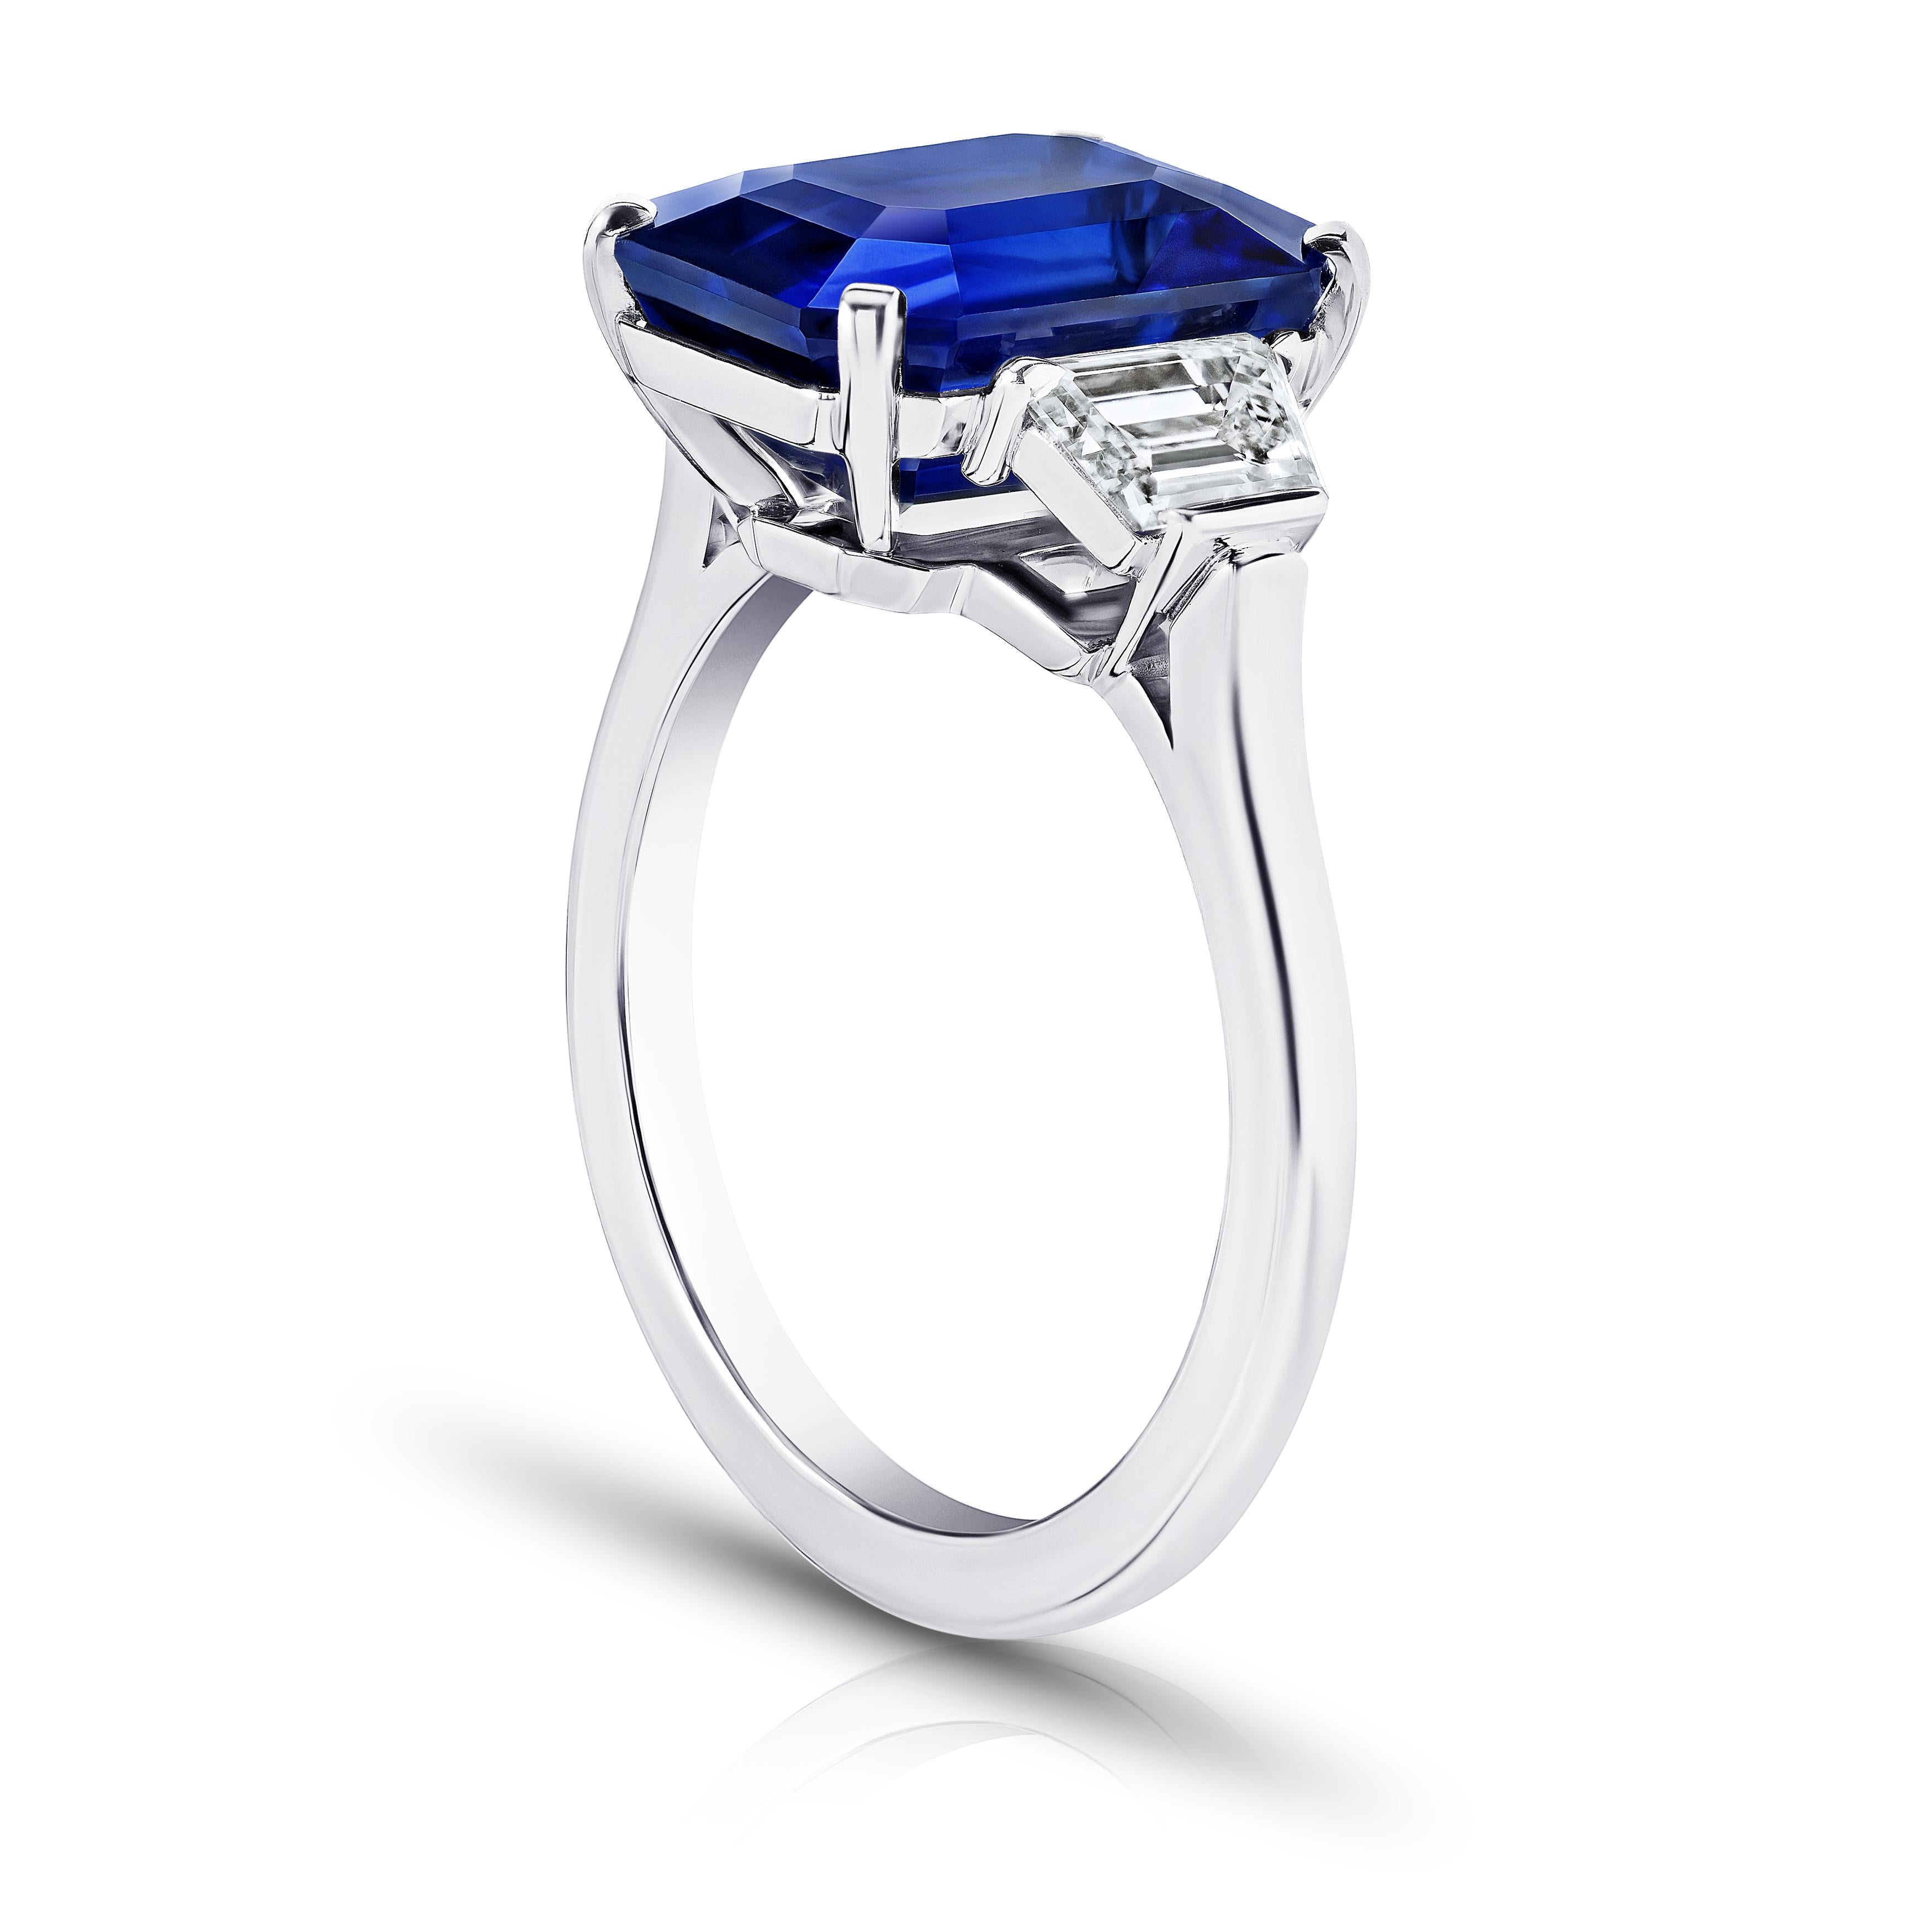 7.11 carat emerald cut blue sapphire with trapezoid diamonds .88 carats set in a handmade platinum ring. This ring is currently a size 7.  We will resize to your finger size without charge.